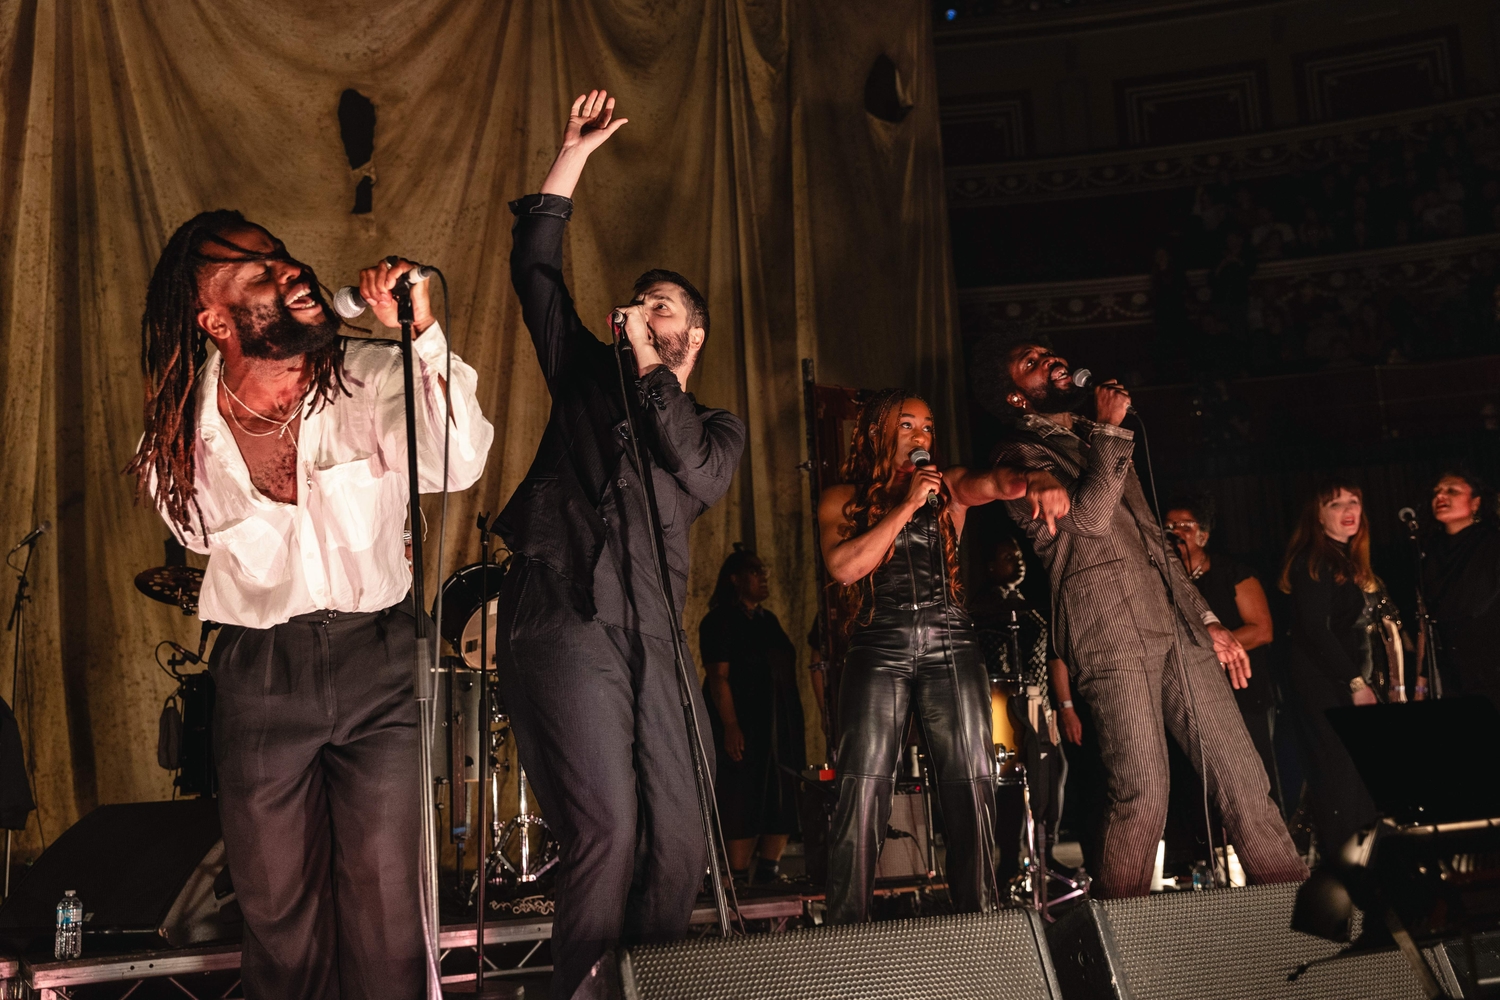 Young Fathers give special show at Royal Albert Hall for Teenage Cancer Trust